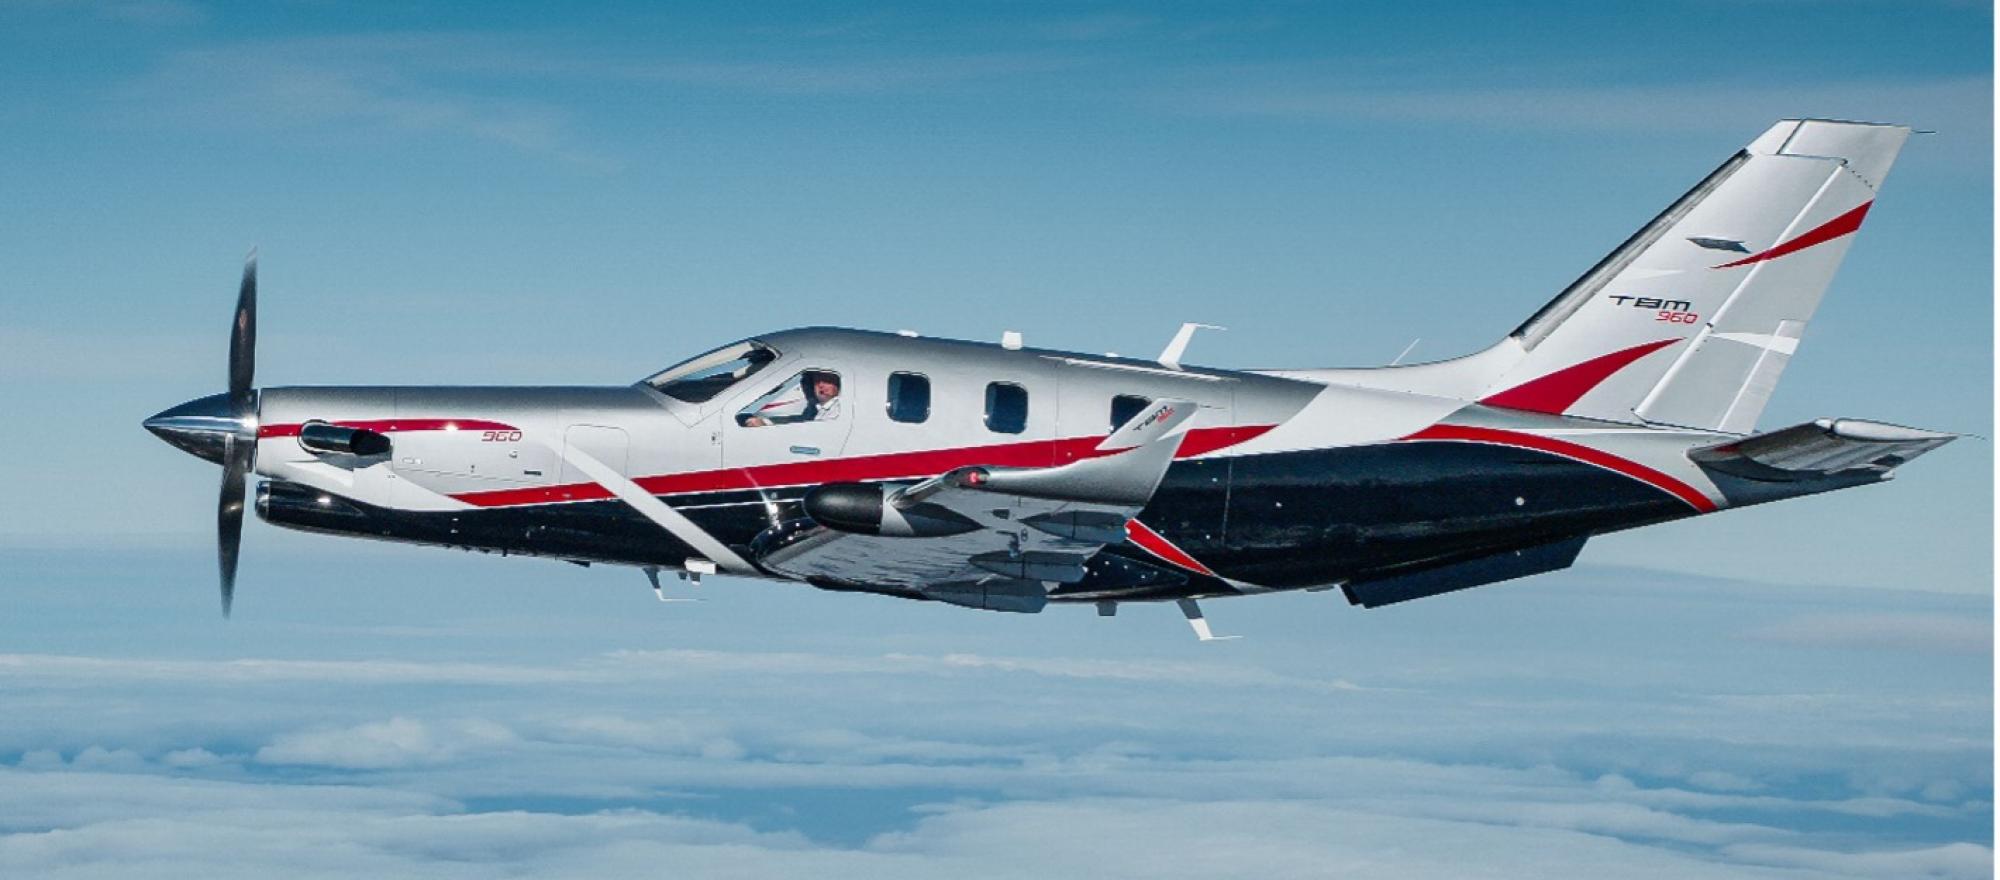 Daher TBM 960 with Sirocco paint scheme in silver and black with red accent stripes in flight